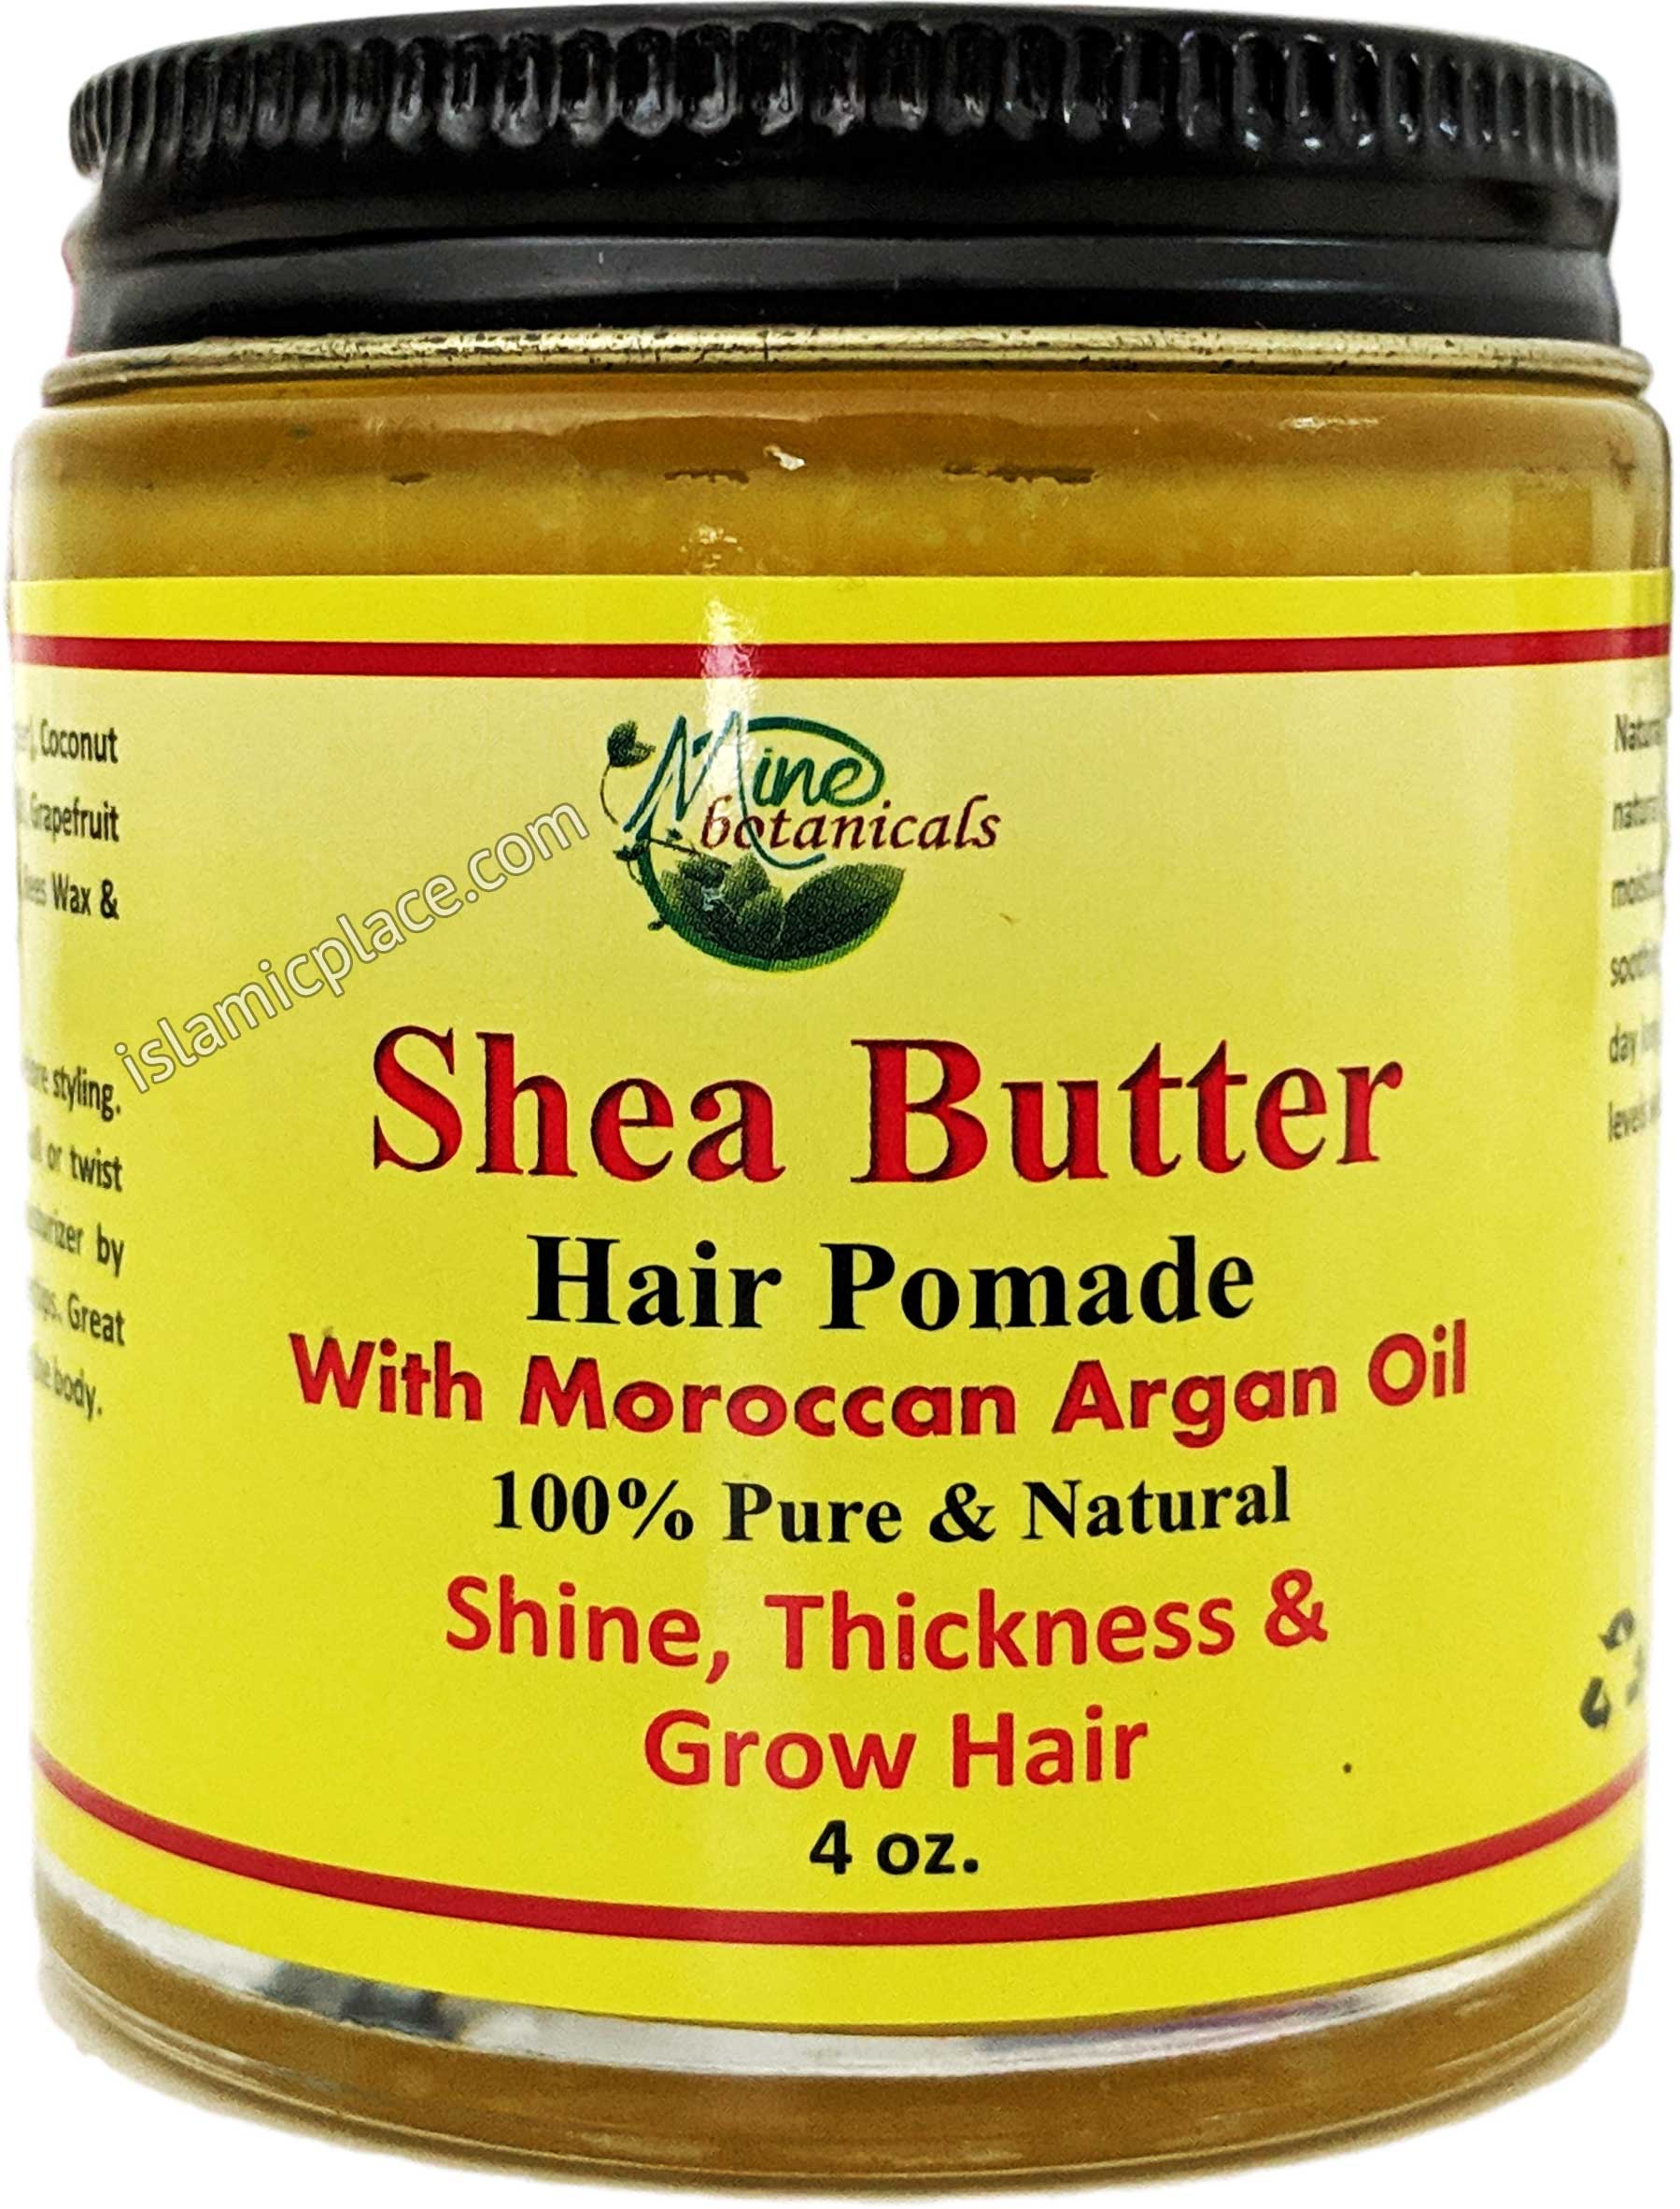 Shea Butter Hair Pomade with Moroccan Argan Oil